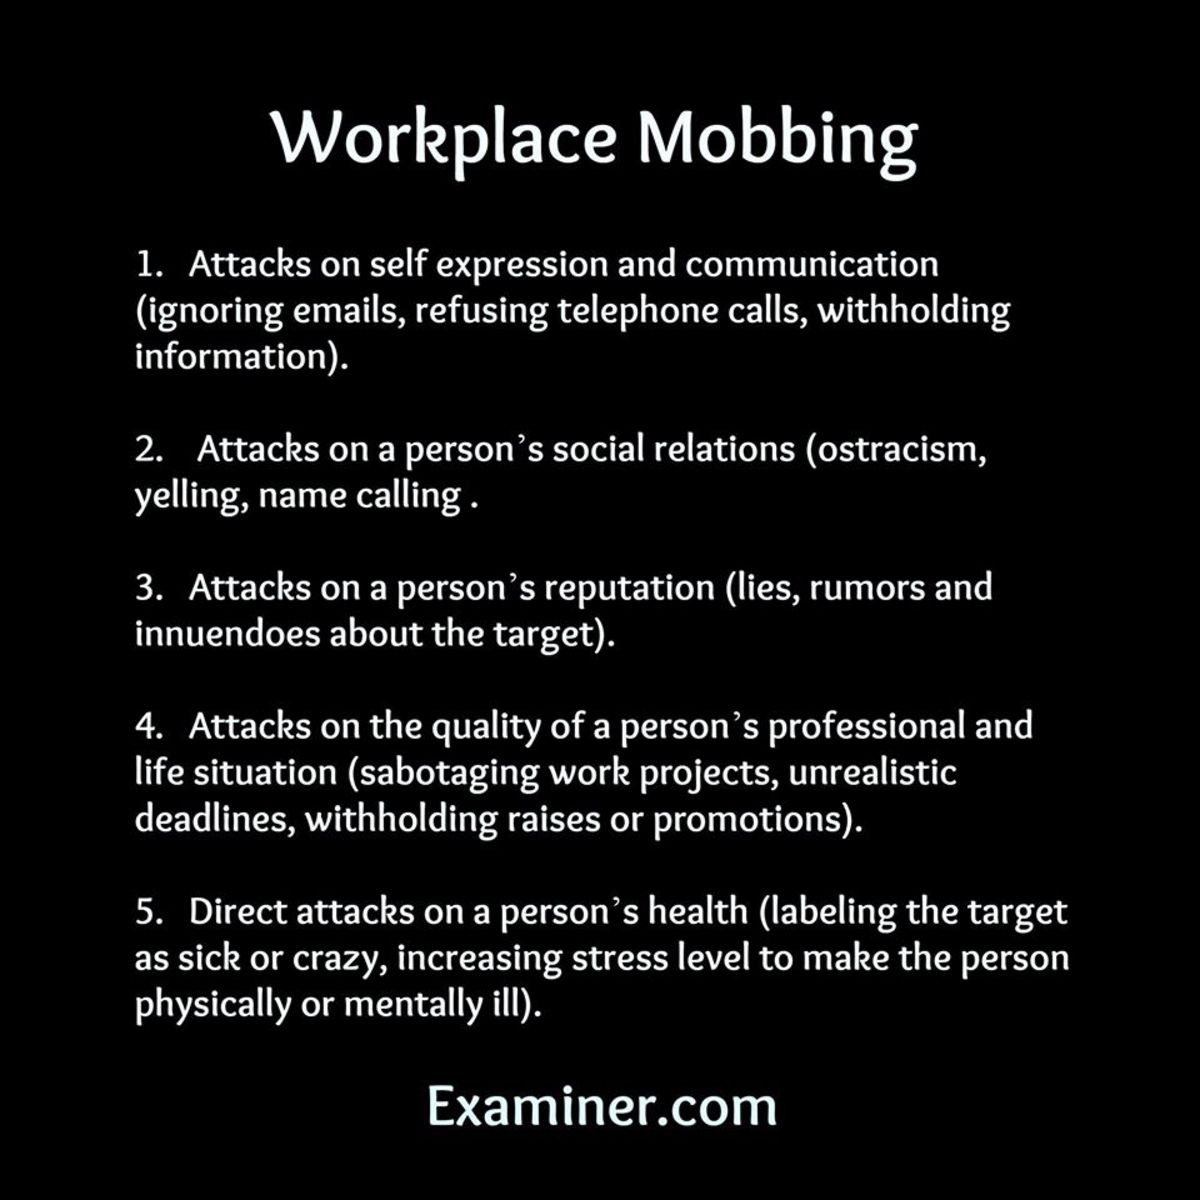 This is just a base framework. The 2005 workplace mobbing was much worse. Think up and down the spectrum. 